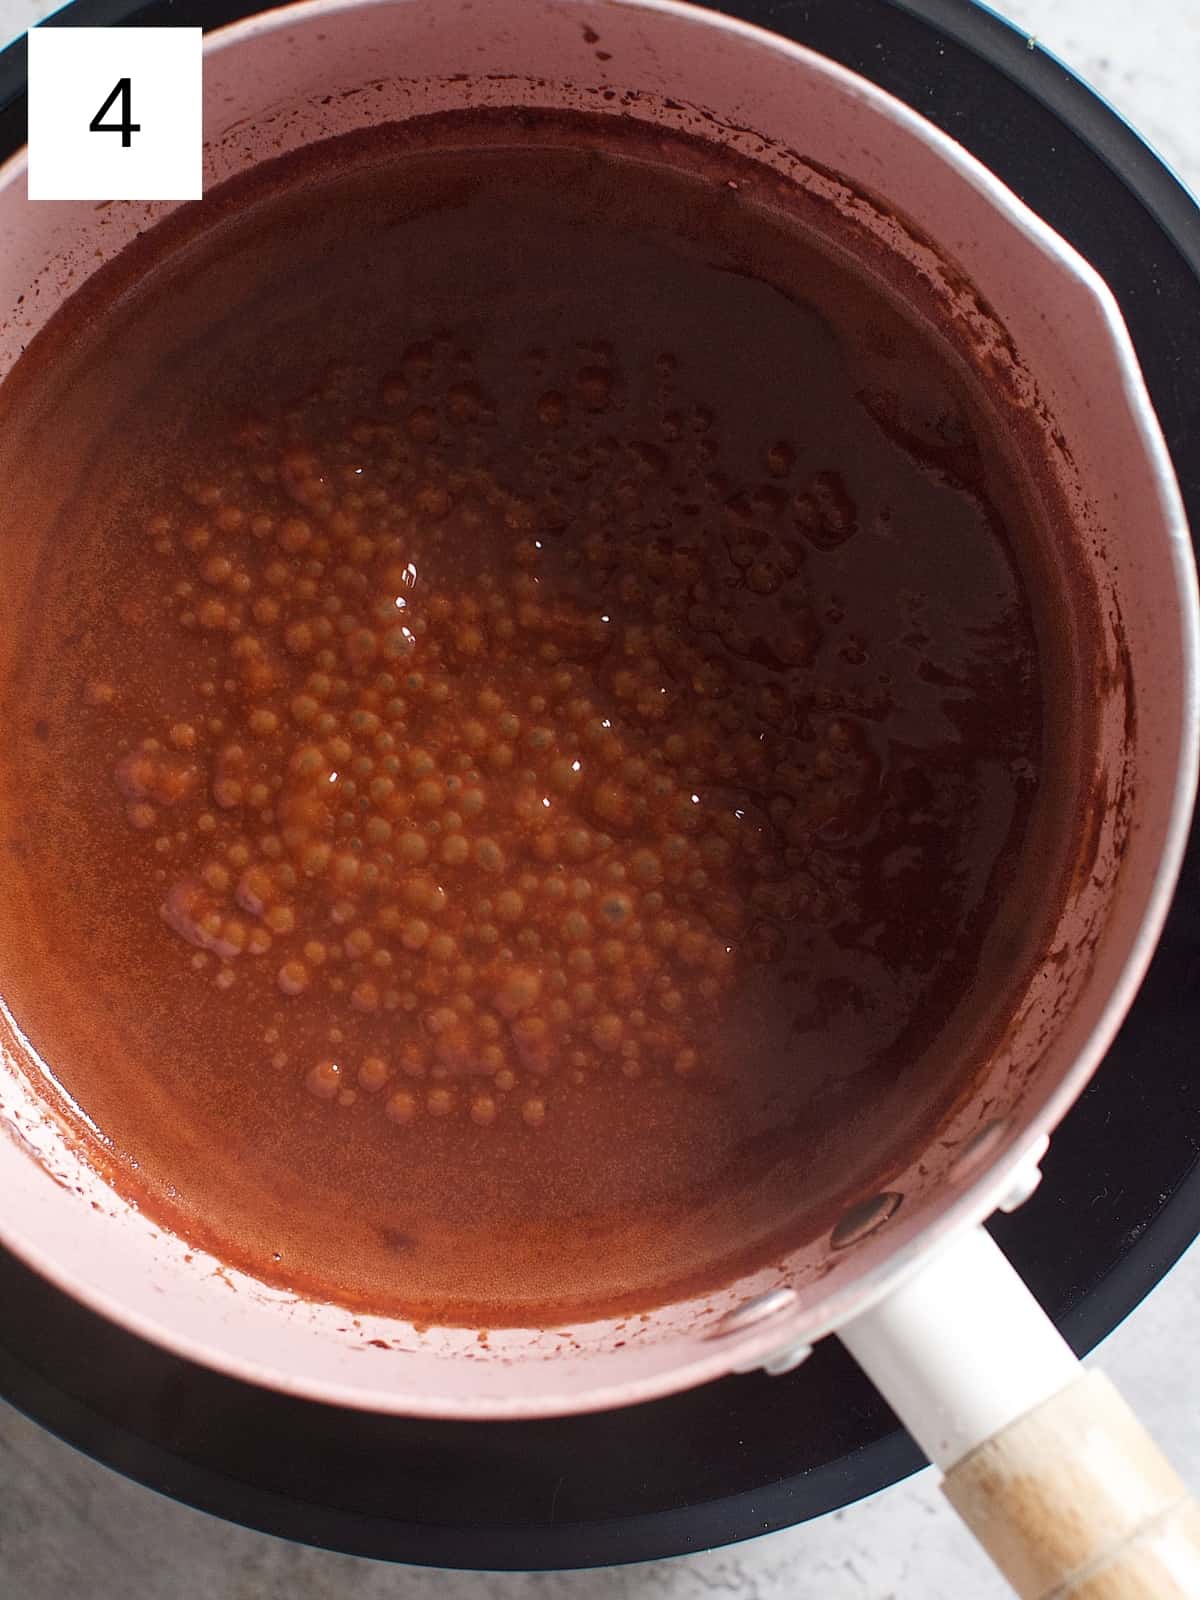 Cocoa mixture is being soft boiled in a heated sauce pan.